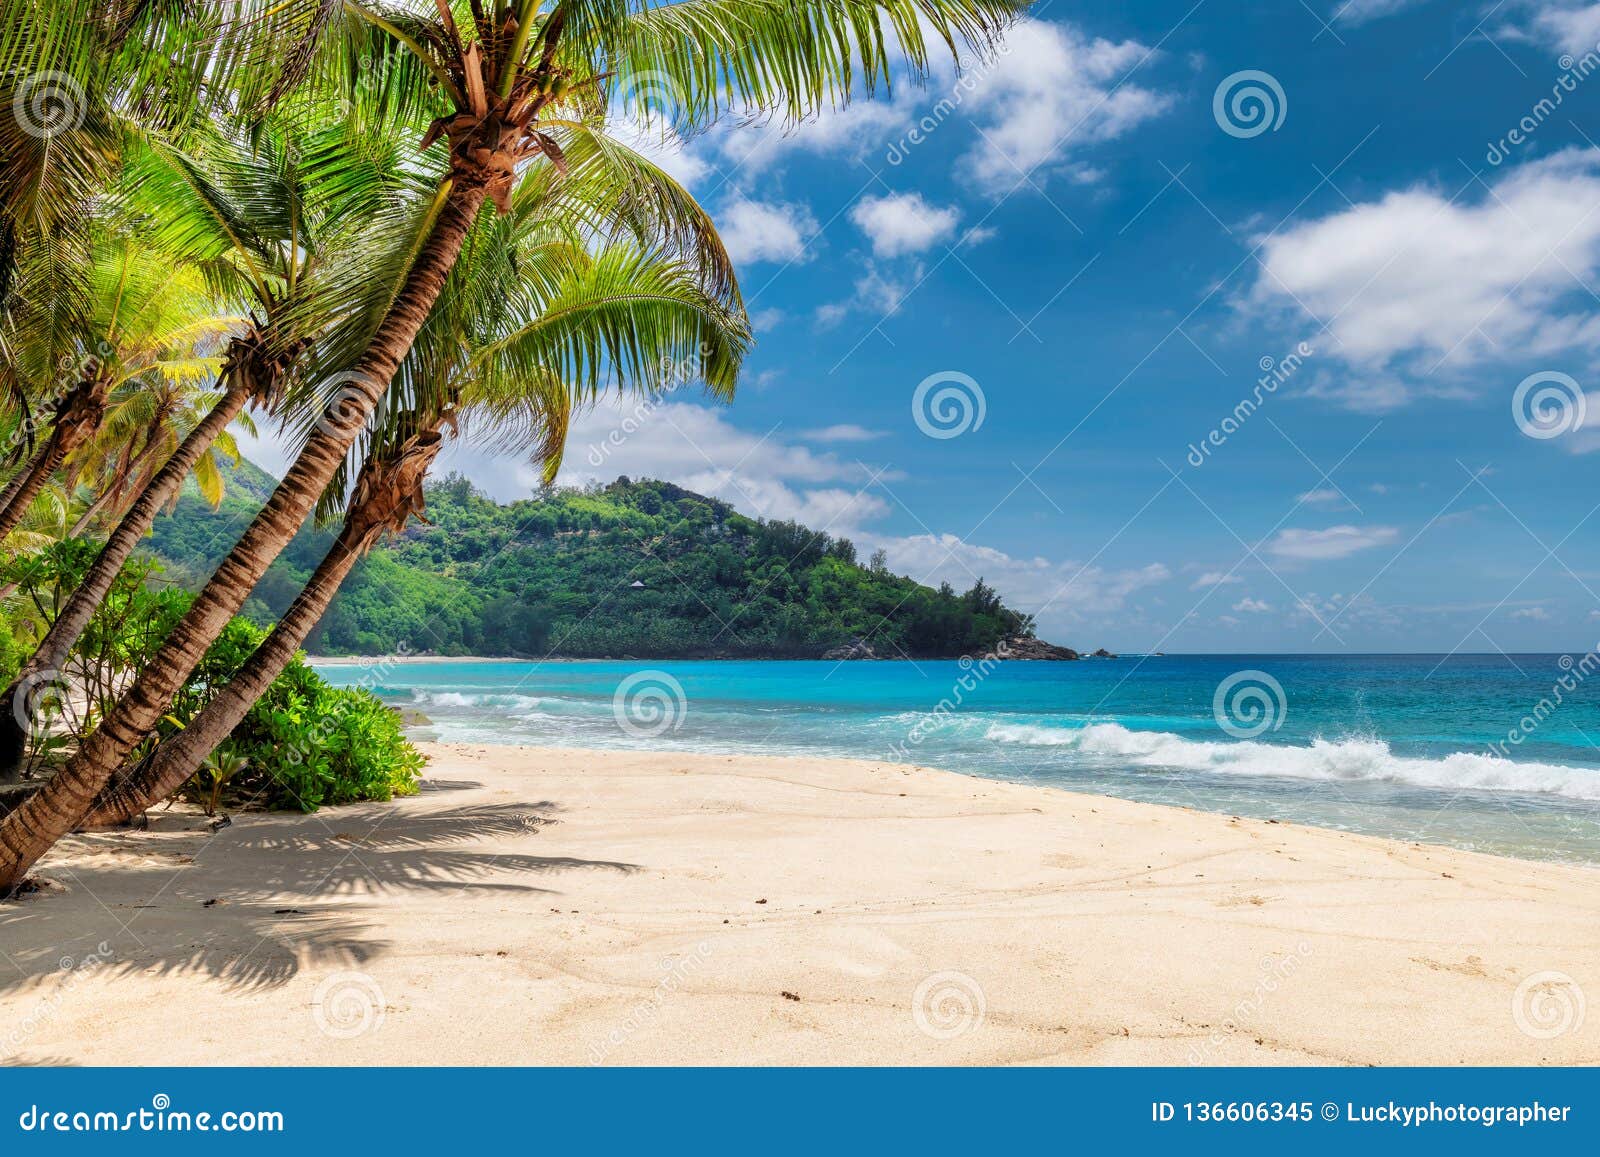 palms and tropical beach with white sand.